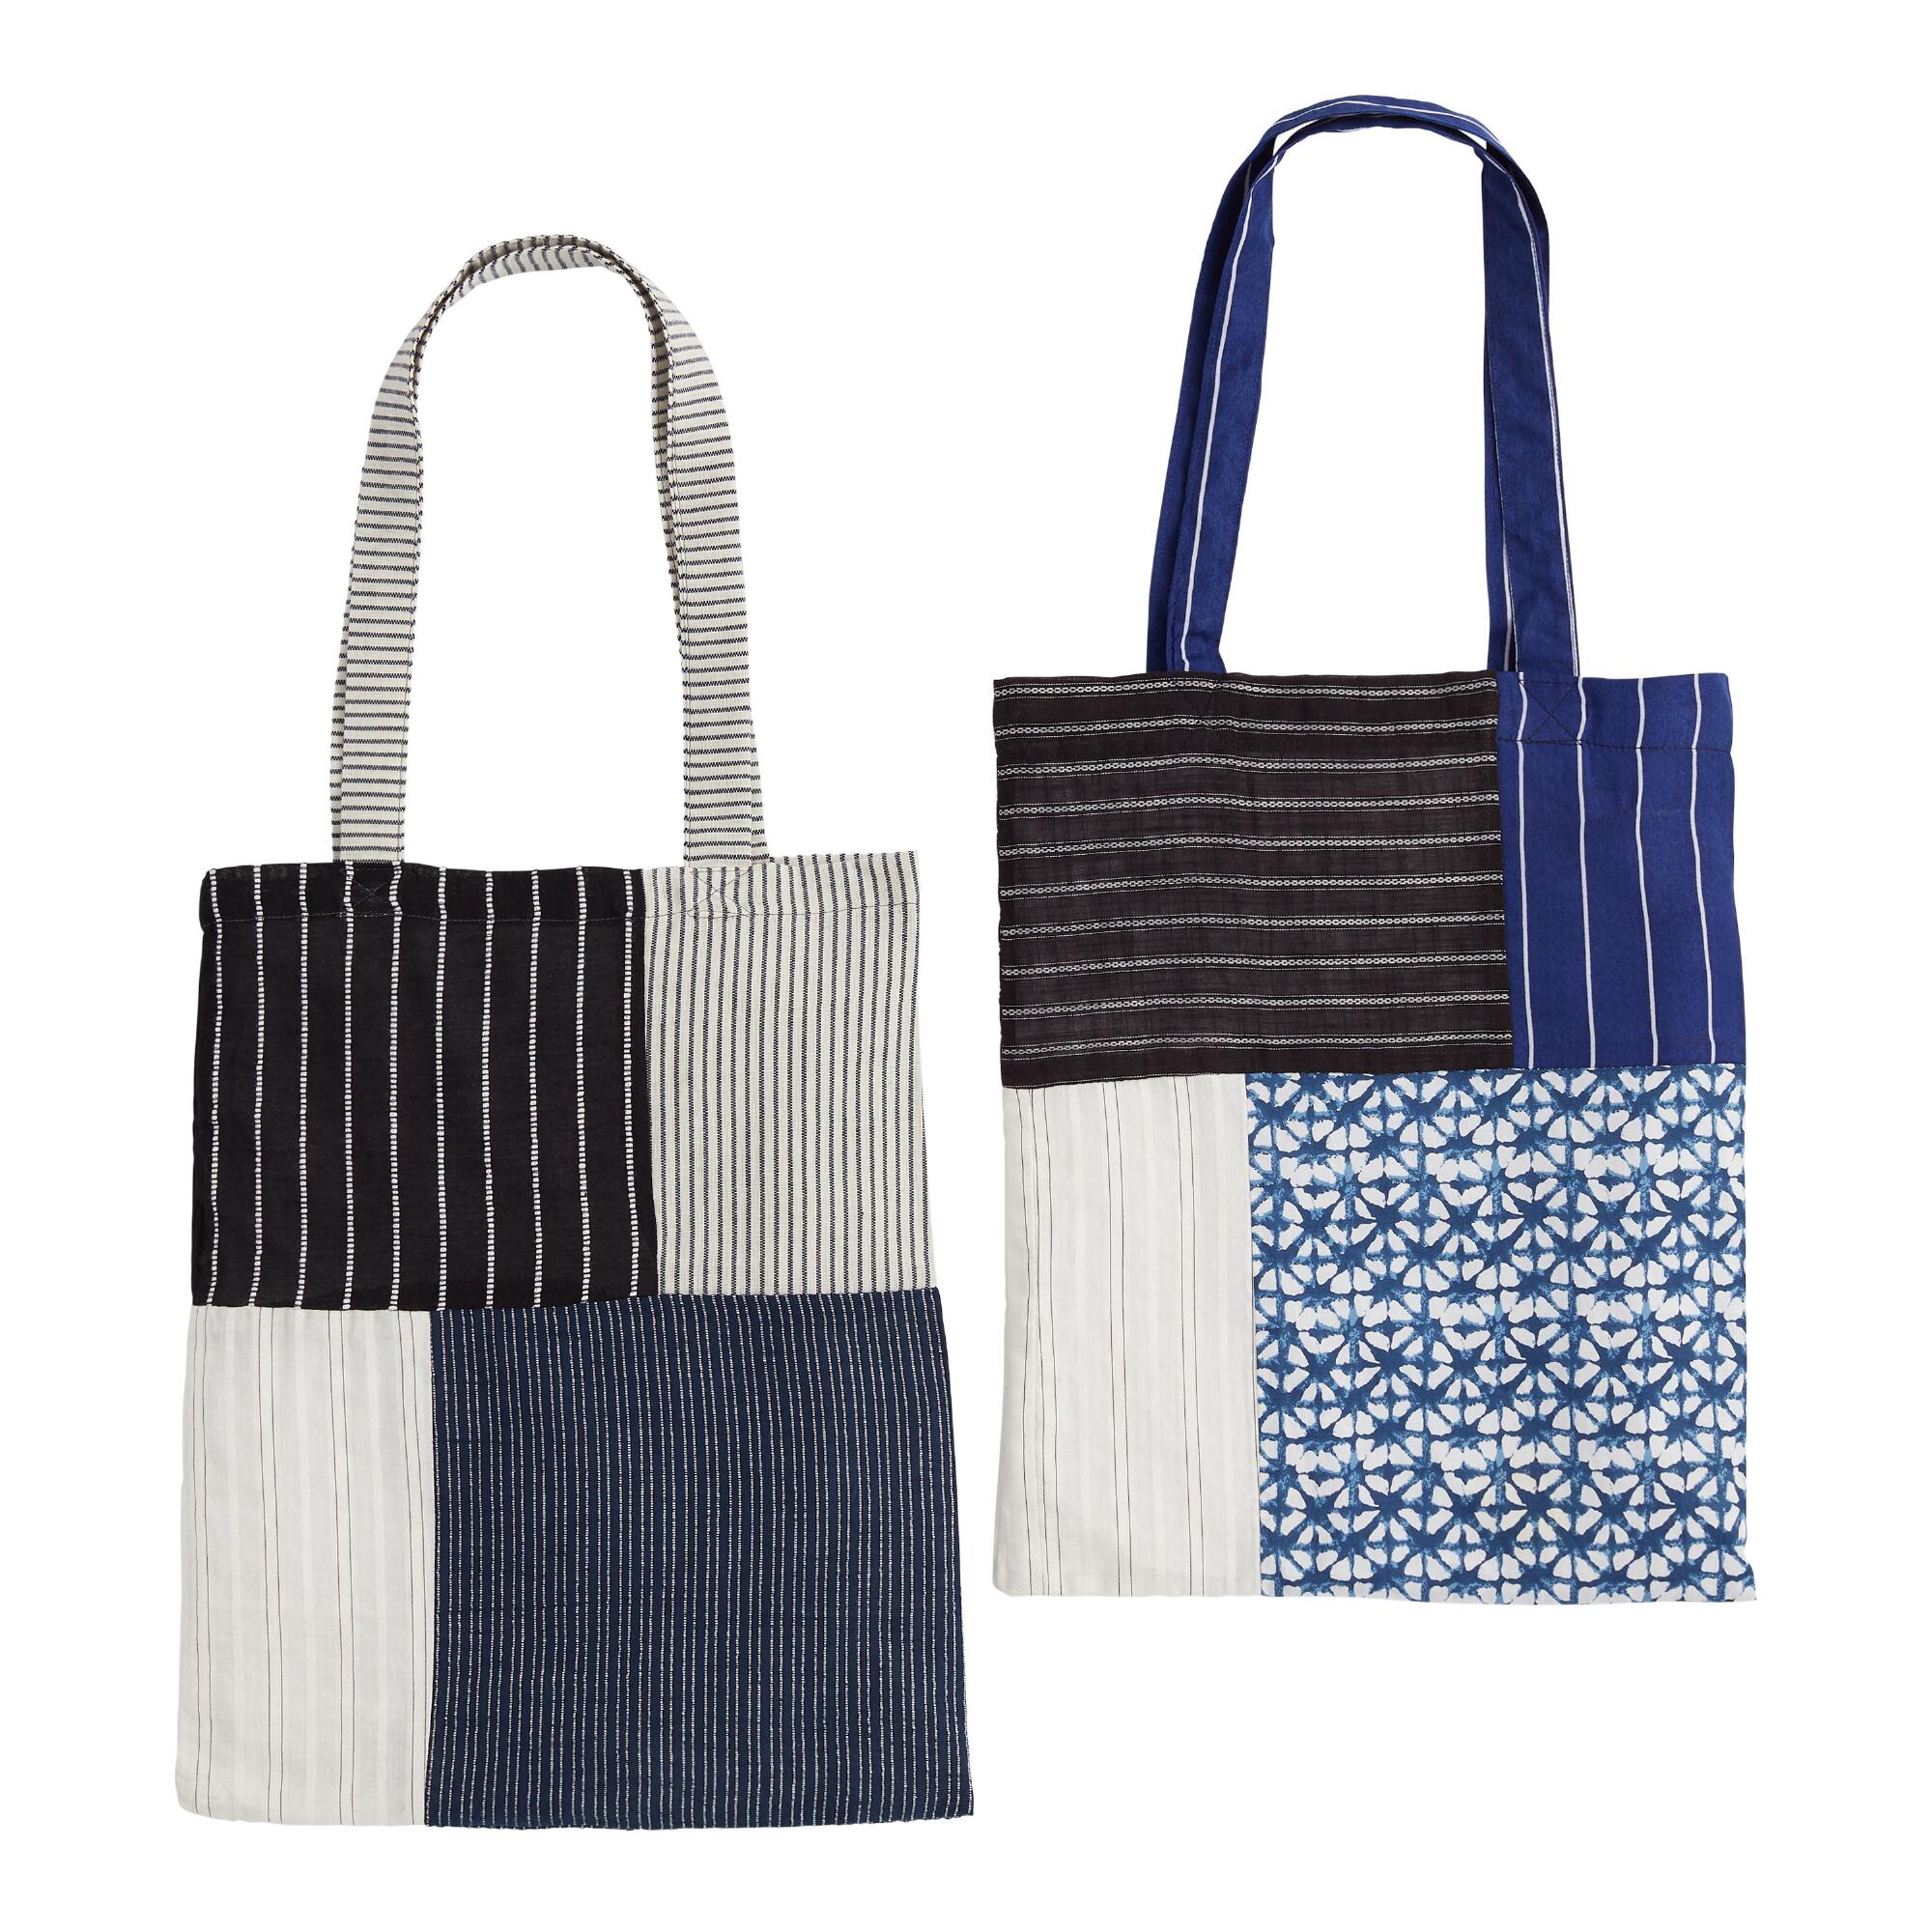 Upcycled Fabric Silaiwali Lightweight Tote Bags Set of 2: Multi - Cotton by World Market